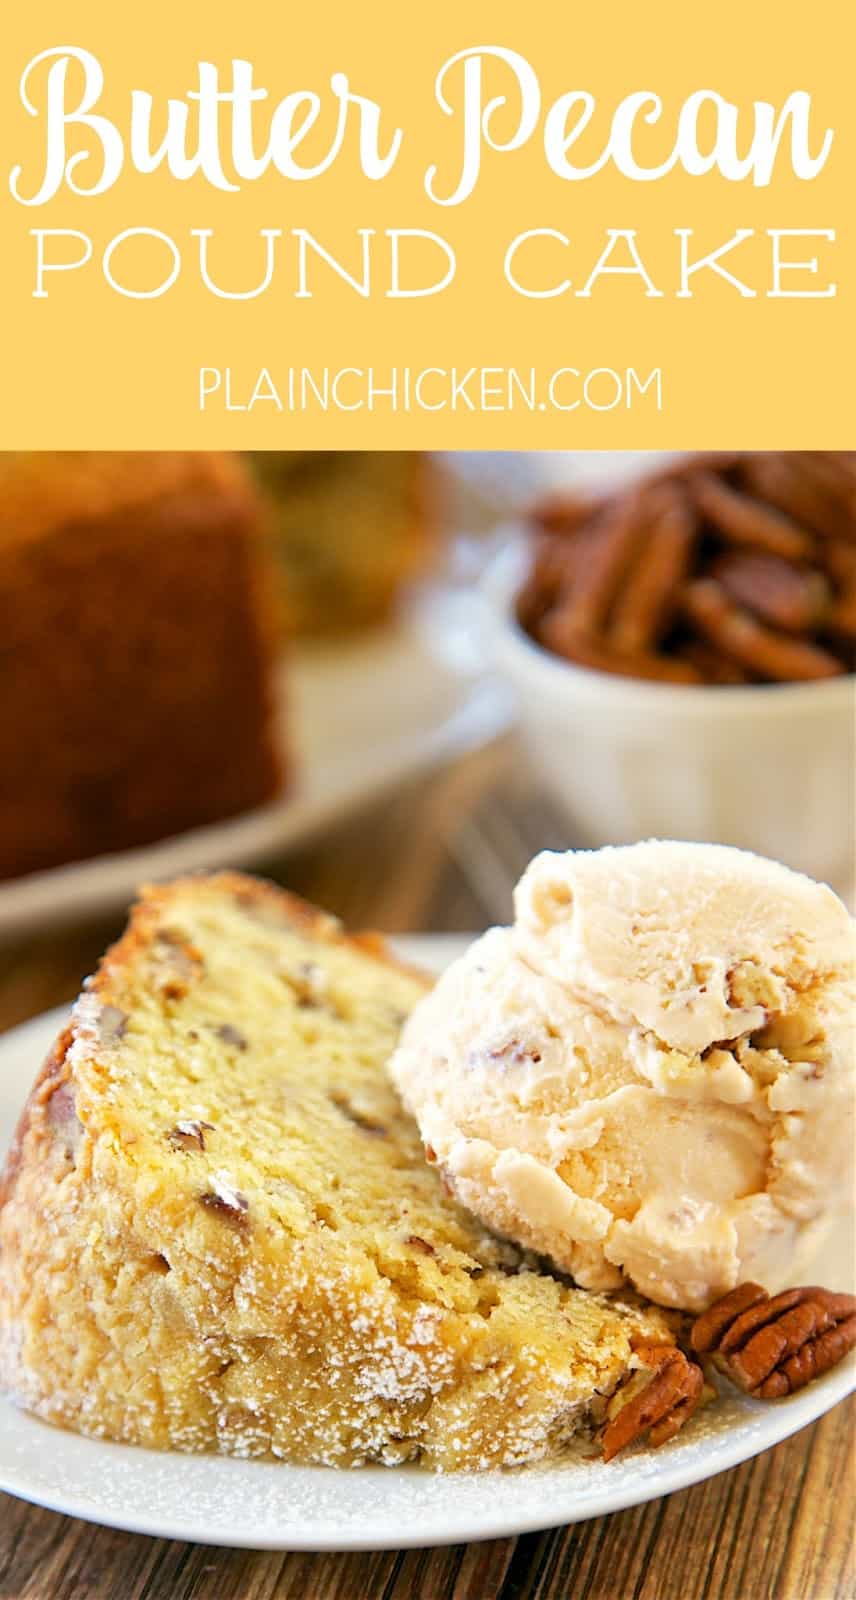 Butter Pecan Pound Cake - one of the AMAZING pound cakes I've ever eaten! So easy and delicious! Flour, vanilla pudding, butter, pecans, eggs, sour cream and Vanilla, Butter and Nut extract. Only takes a minute to make and it smells amazing while it bakes!I took this to a party and everyone asked for the recipe!